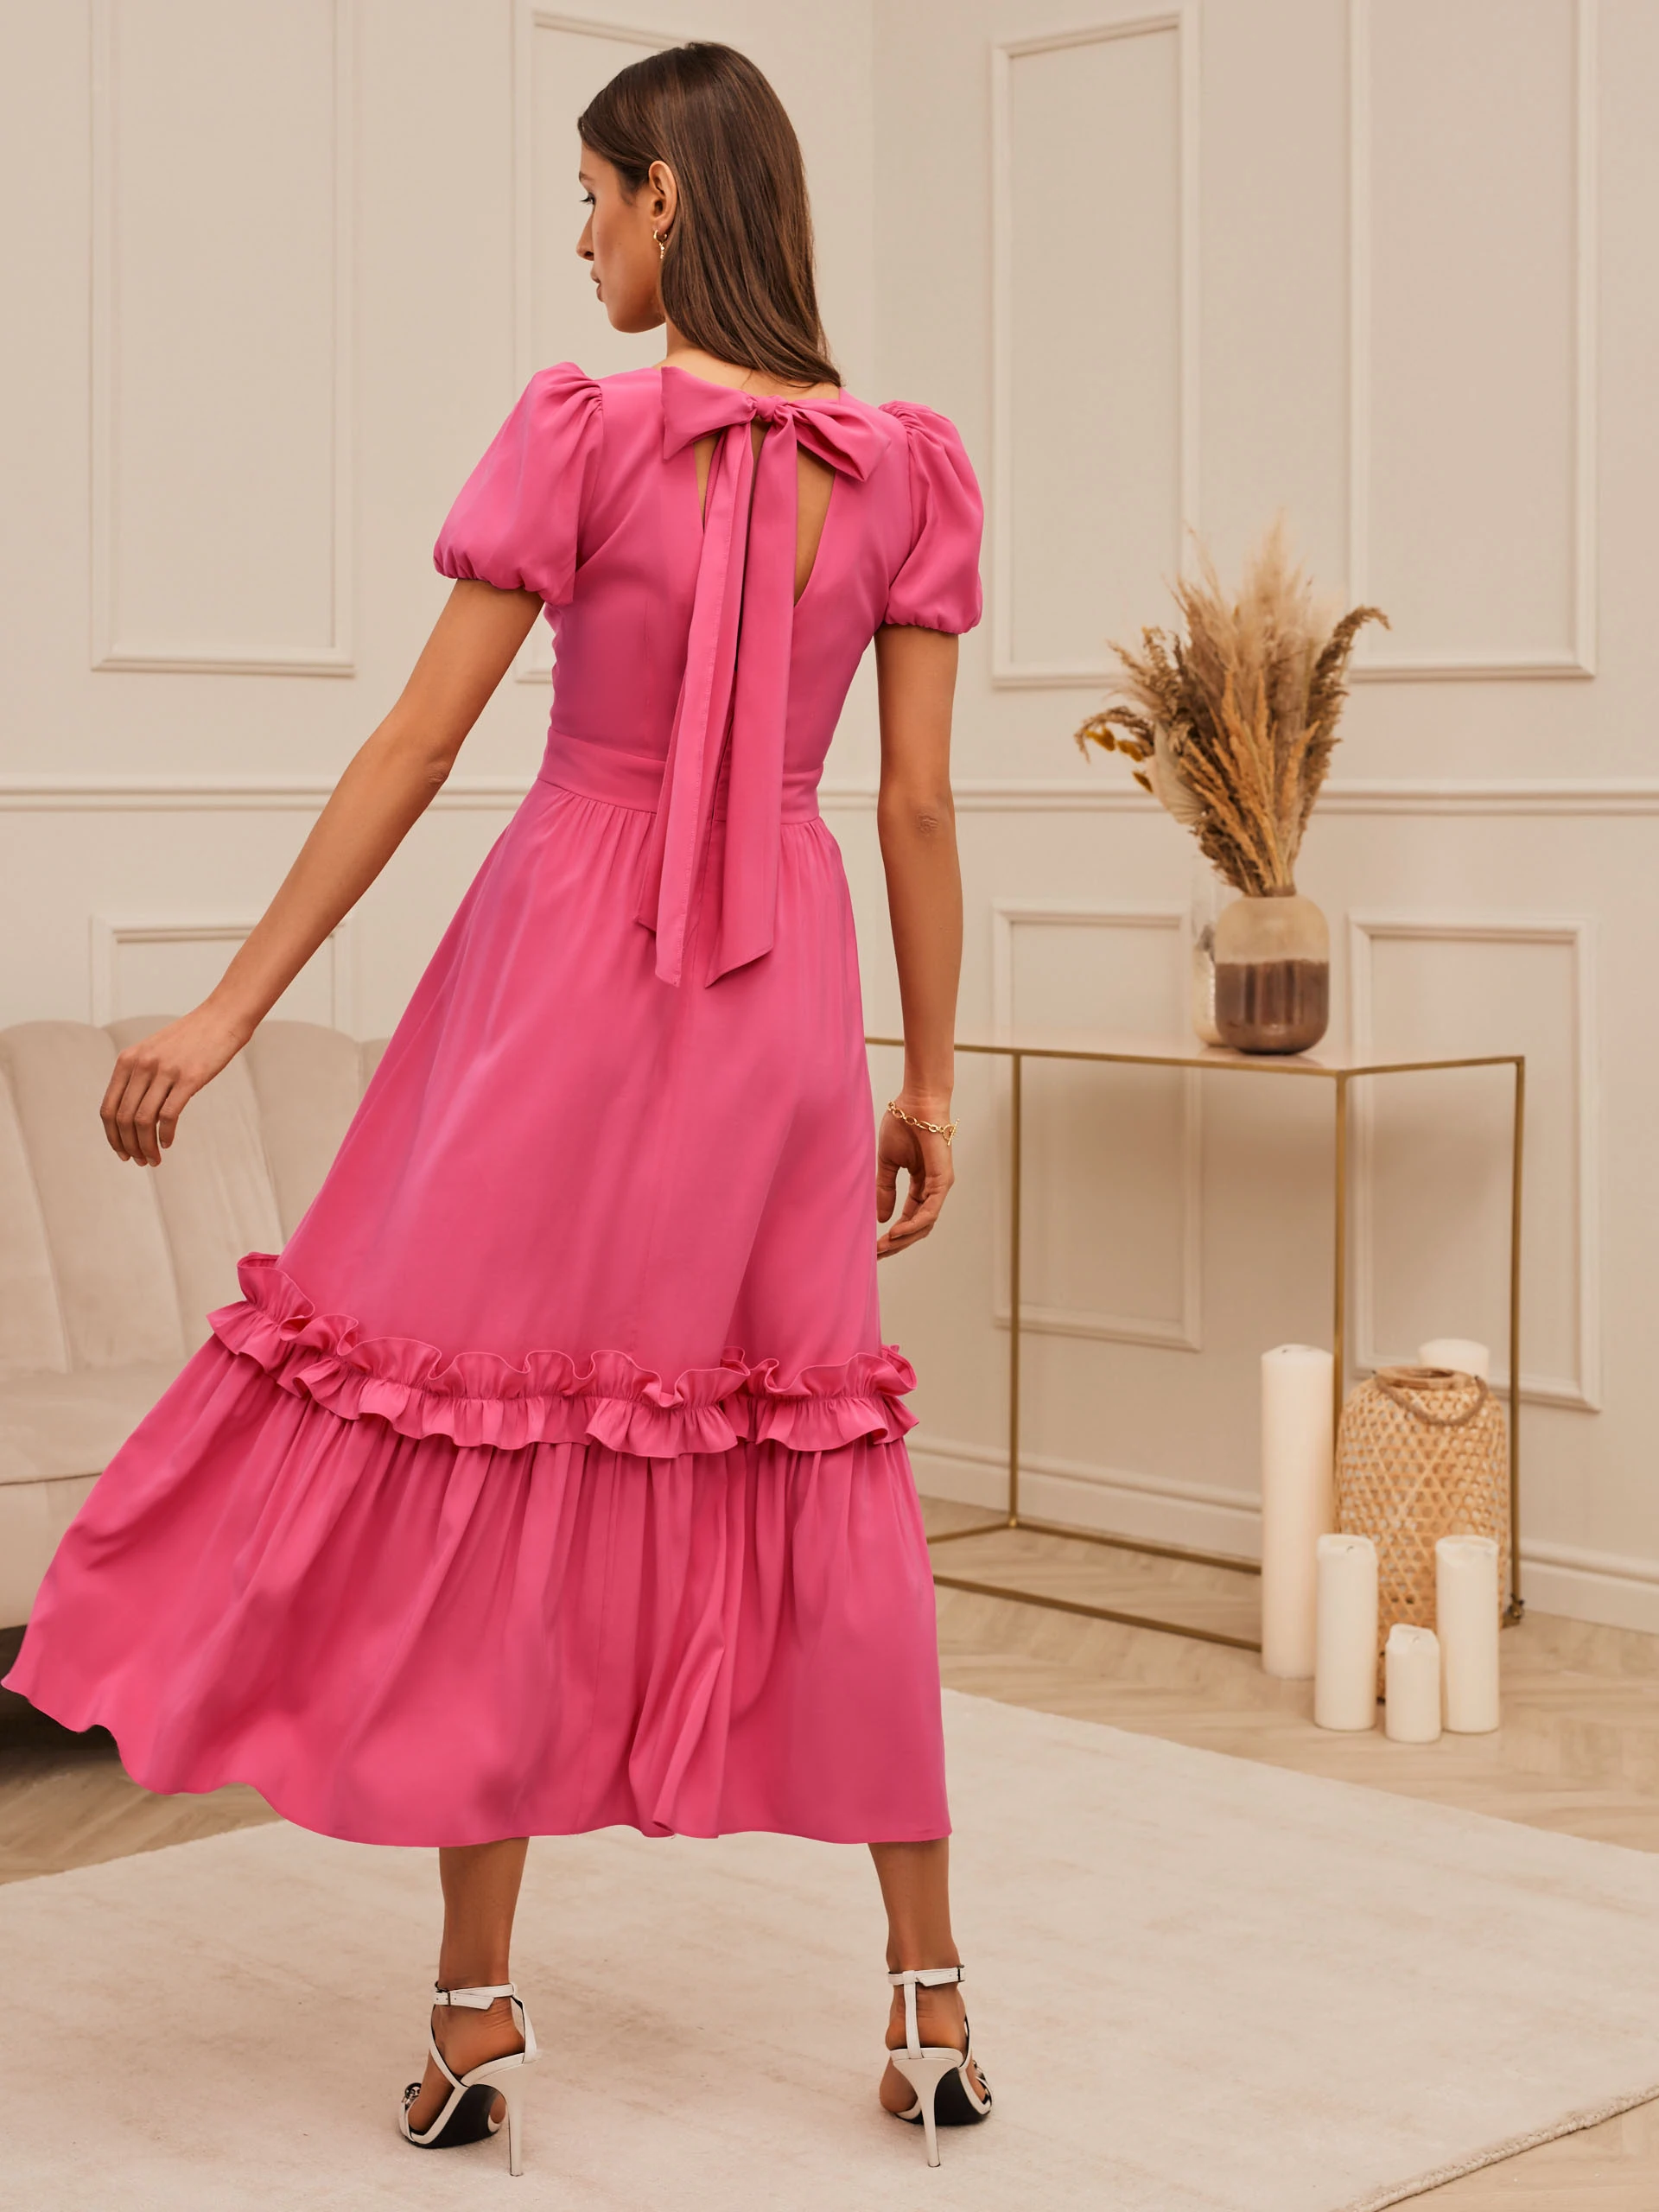 PINK DRESS WITH RUFFLES